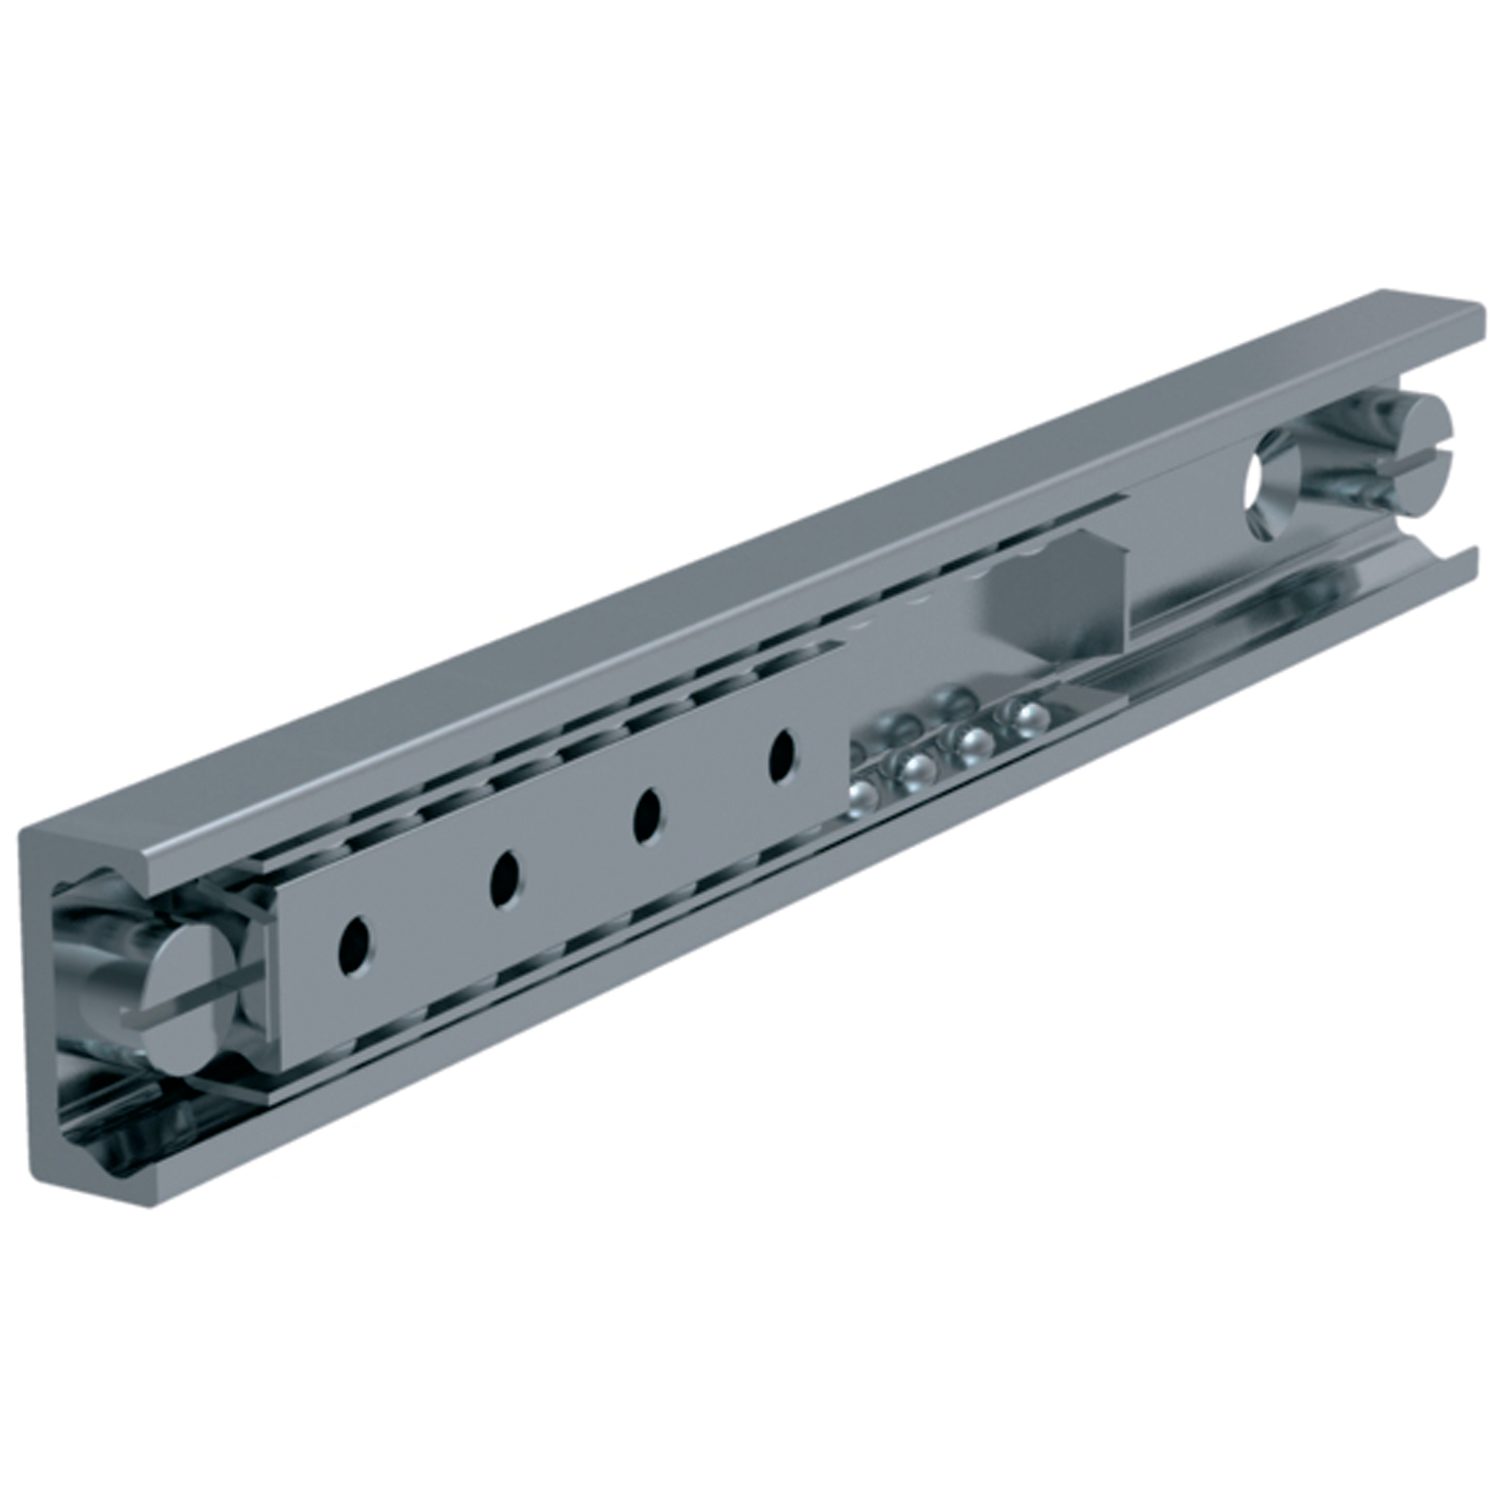 High Load Rails Easy slide high-load guideways come in sizes 28, 35, 43 or 63. They are made from zinc-plated steel with induction-hardened steel raceways.